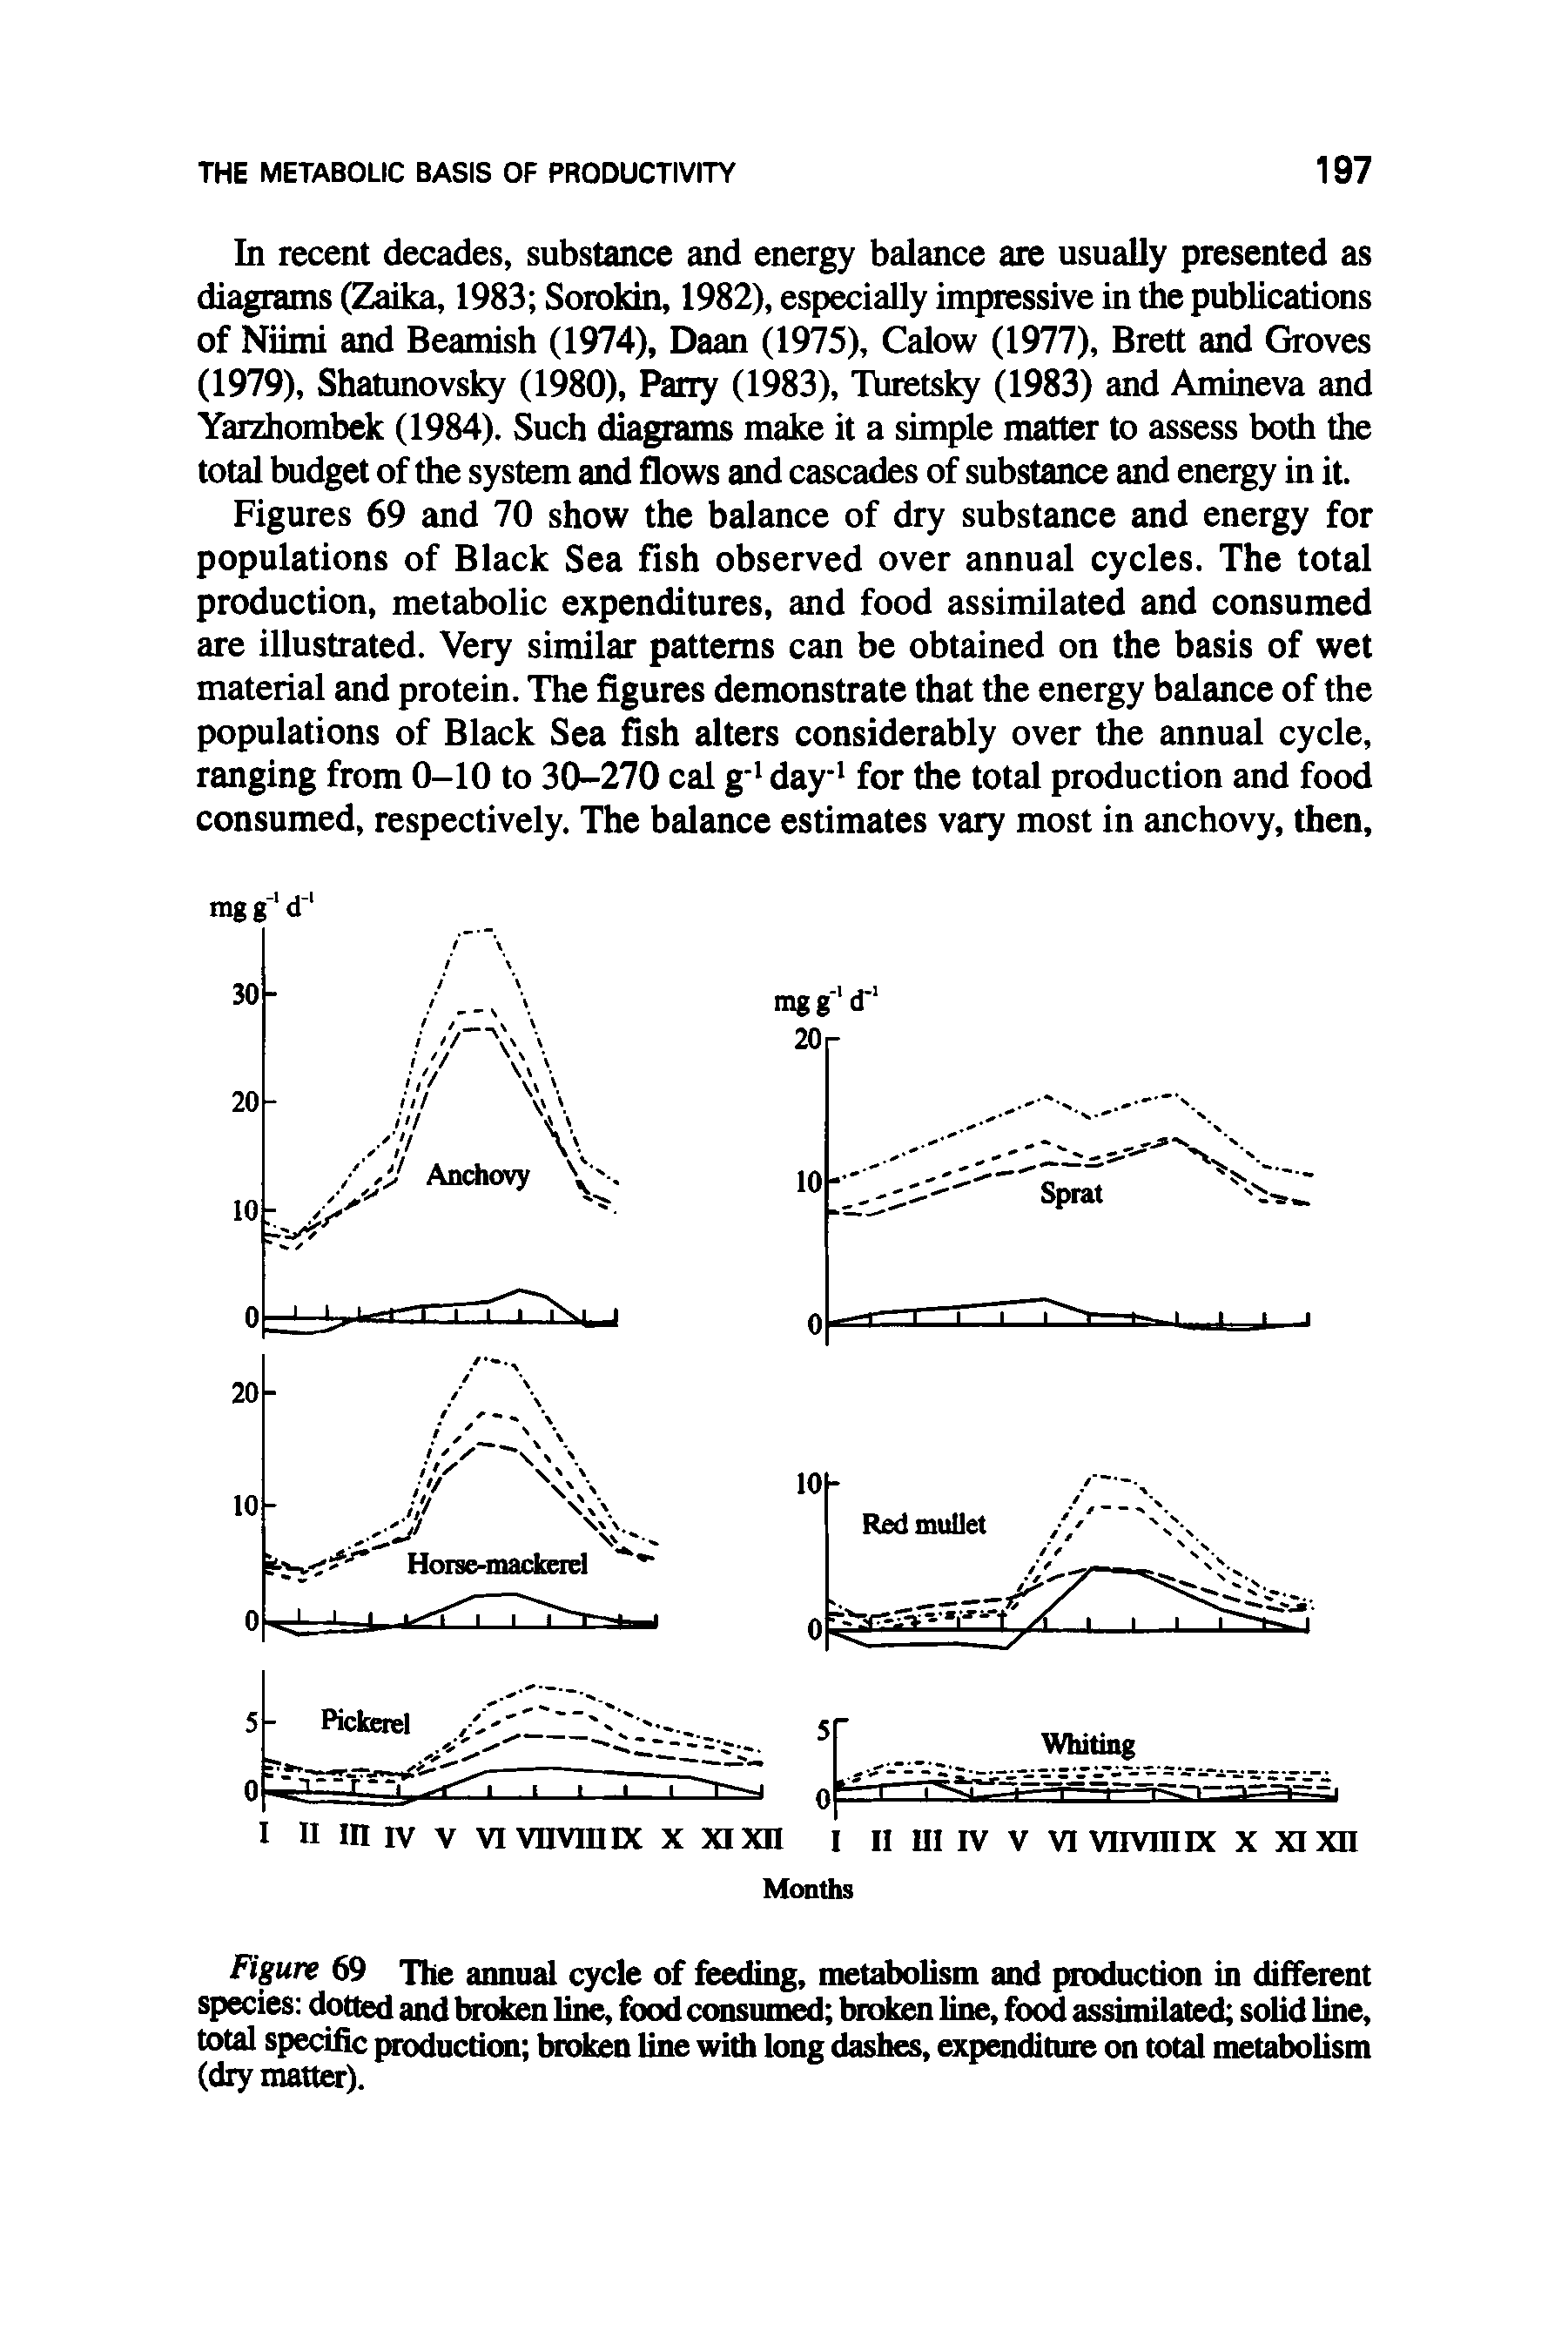 Figures 69 and 70 show the balance of dry substance and energy for populations of Black Sea fish observed over annual cycles. The total production, metabolic expenditures, and food assimilated and consumed are illustrated. Very similar patterns can be obtained on the basis of wet material and protein. The figures demonstrate that the energy balance of the populations of Black Sea fish alters considerably over the annual cycle, ranging from 0-10 to 30-270 cal g 1 day1 for the total production and food consumed, respectively. The balance estimates vary most in anchovy, then,...